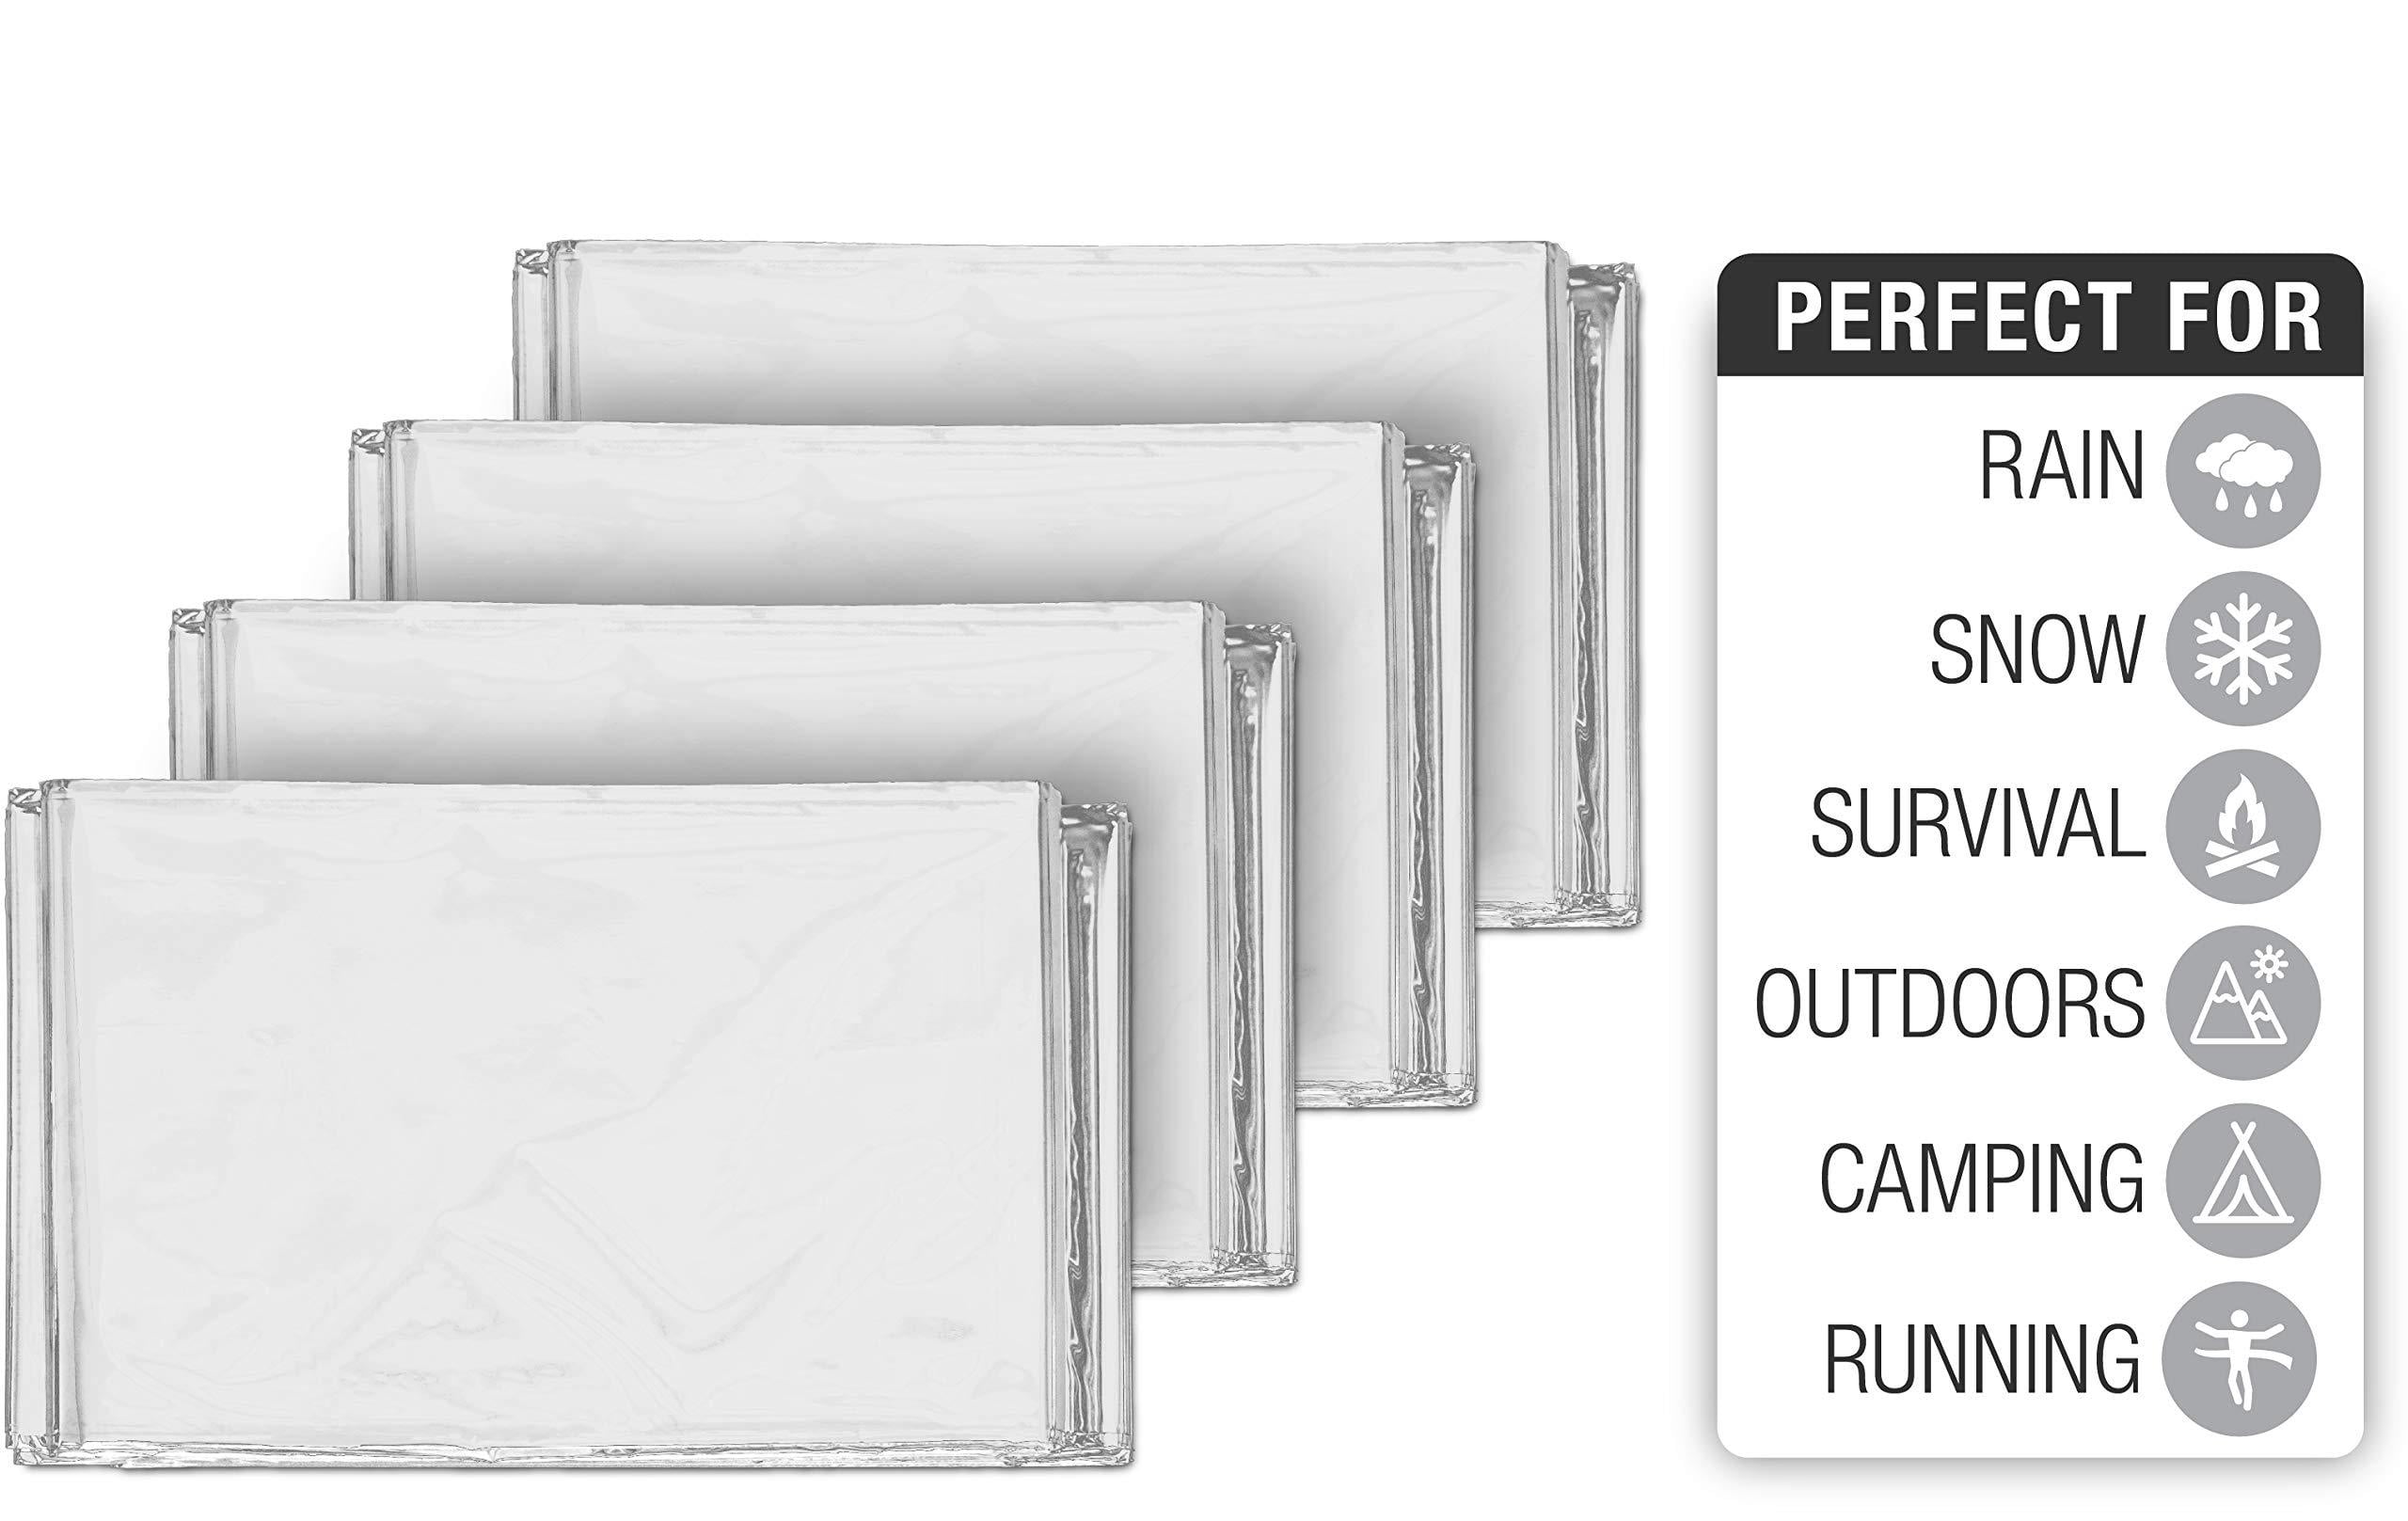 4-Pack Army Green Marathons or First Aid + Signature Gold Foil Space Blanket: Designed for NASA Outdoors Emergency Mylar Thermal Blankets Hiking Survival 